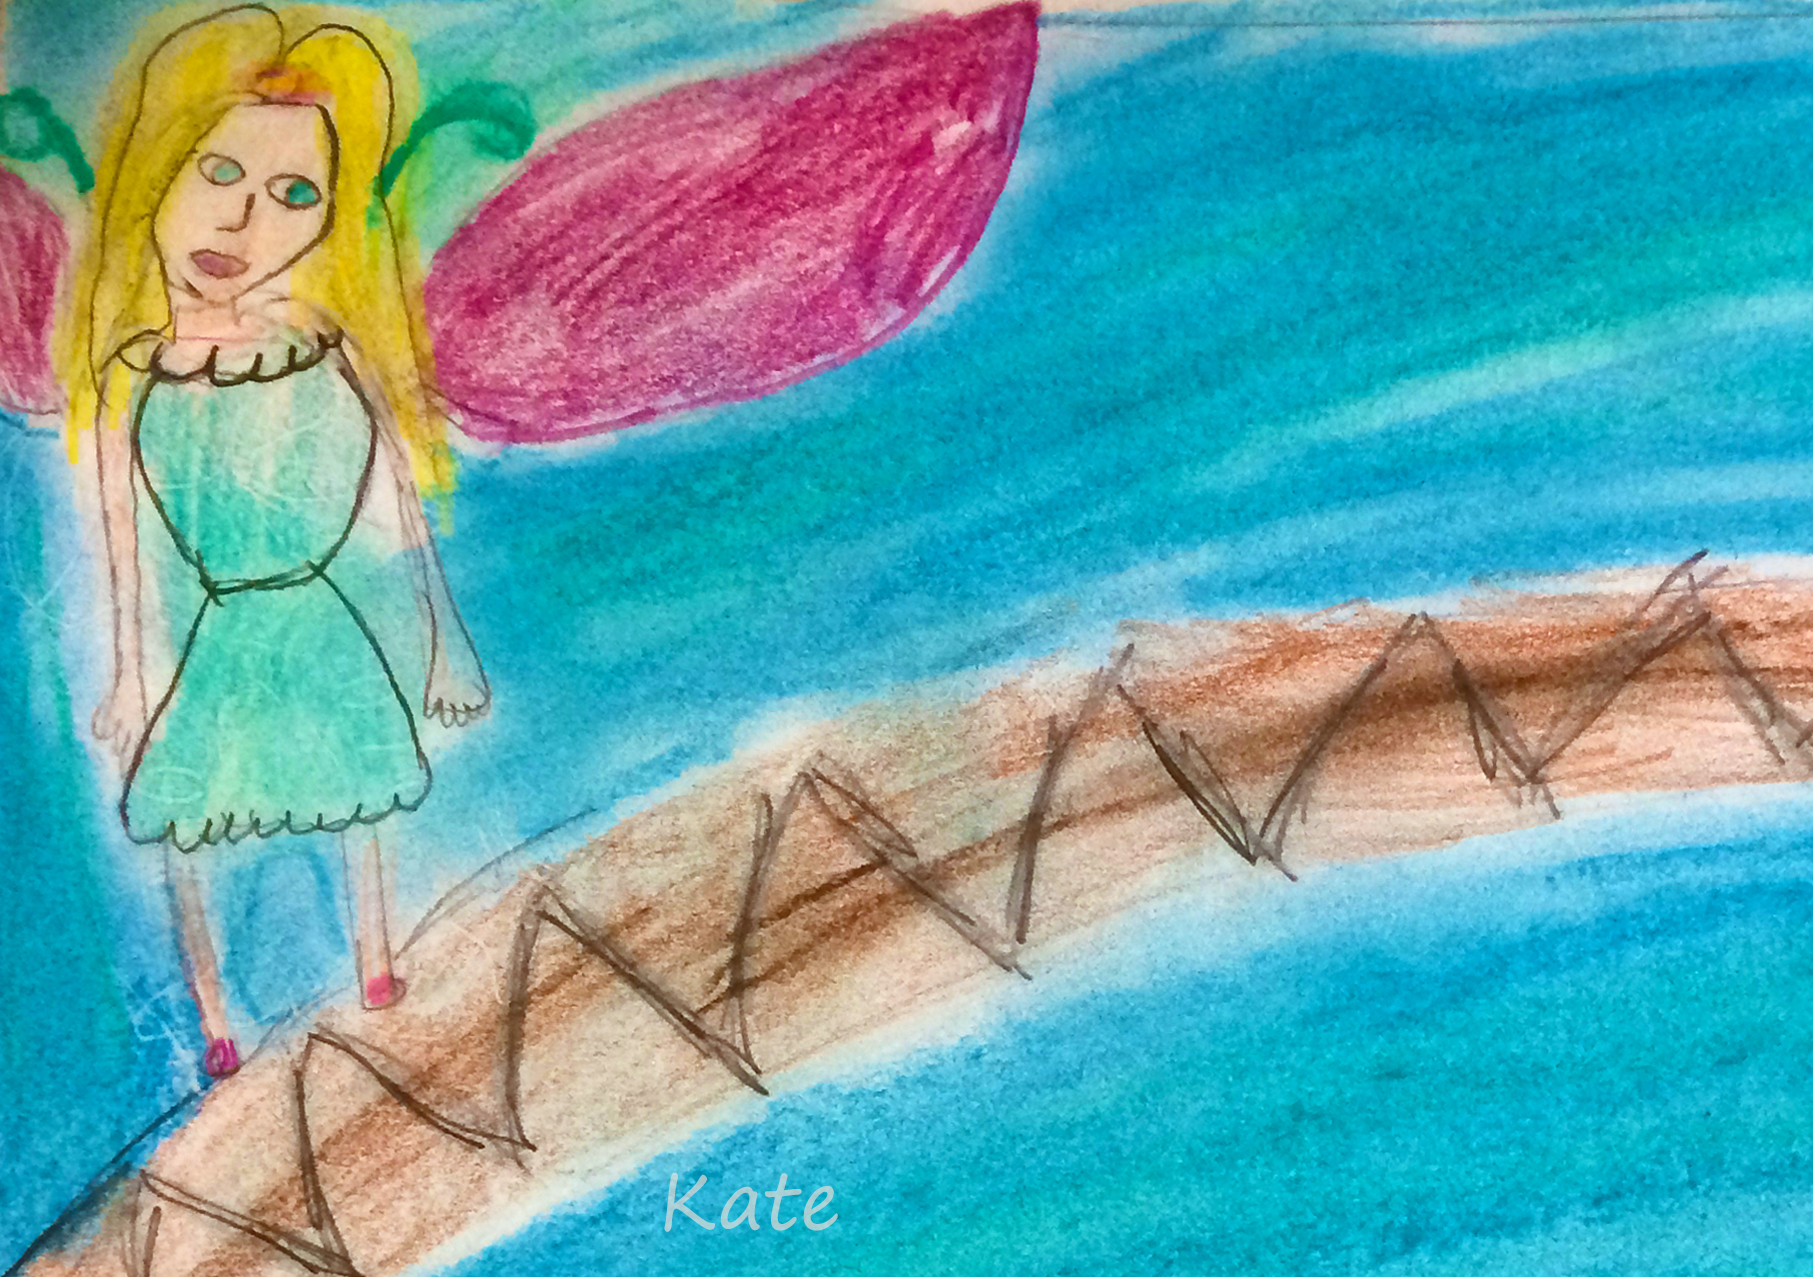 The Fairy and the Mermaid detail, The Fairy and the Mermaid by Kate, fantasy art workshop for kids, art classes for kids, art classes for kids in redlands, art classes for kids brisbane, engaged in art, engaged in art classes for kids